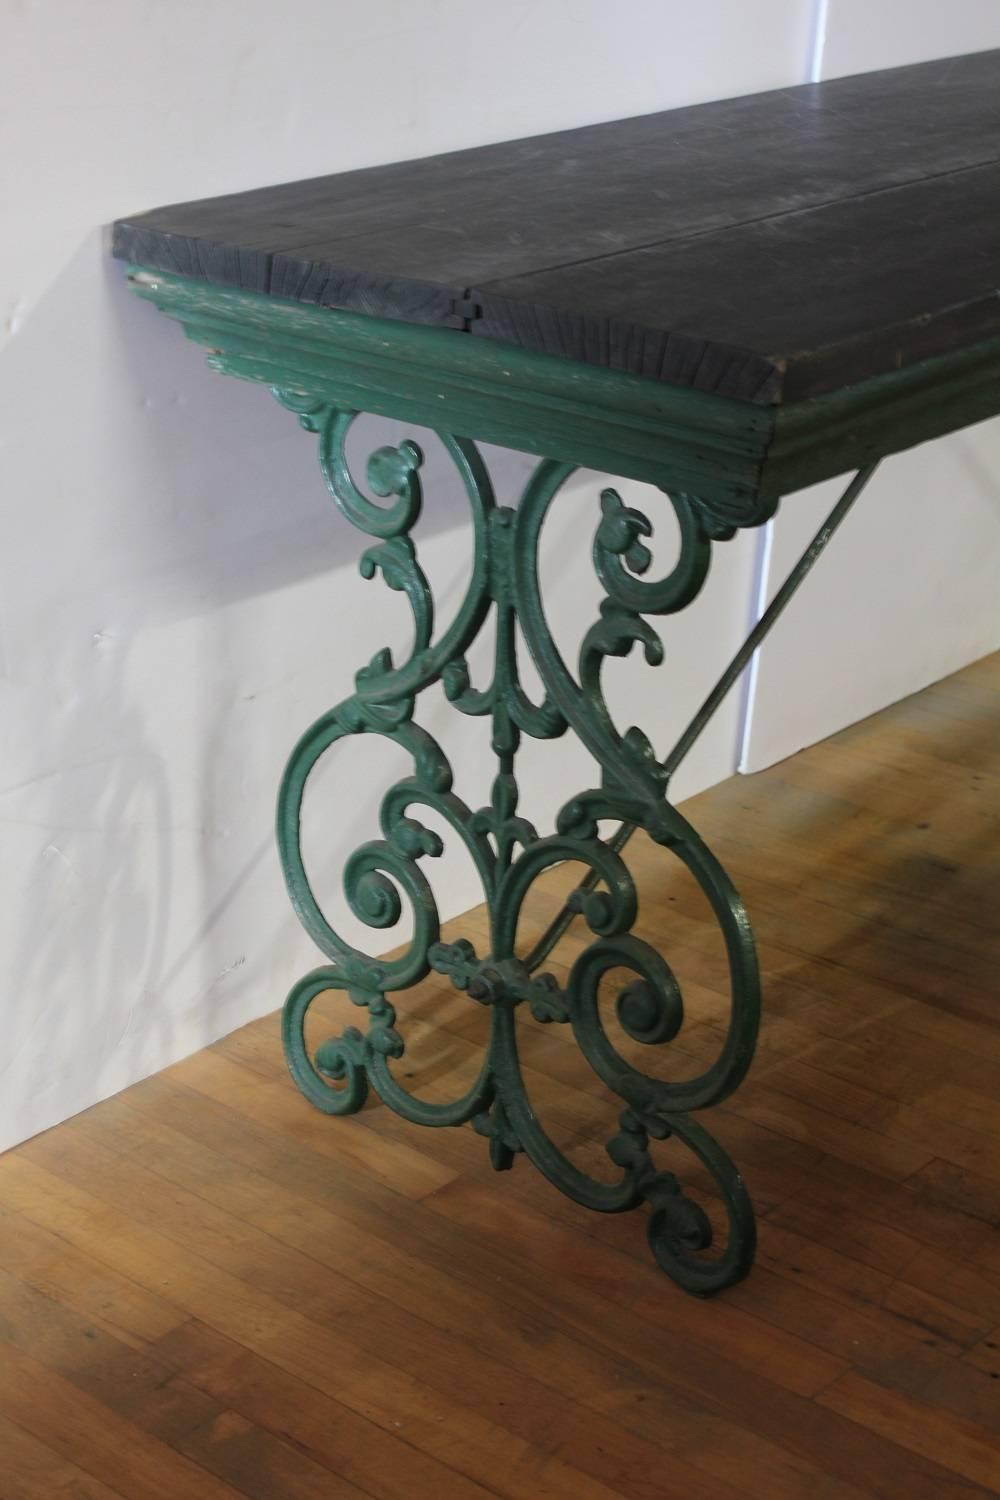 Long antique American department store display table with cast iron base and wood top, 11 feet.